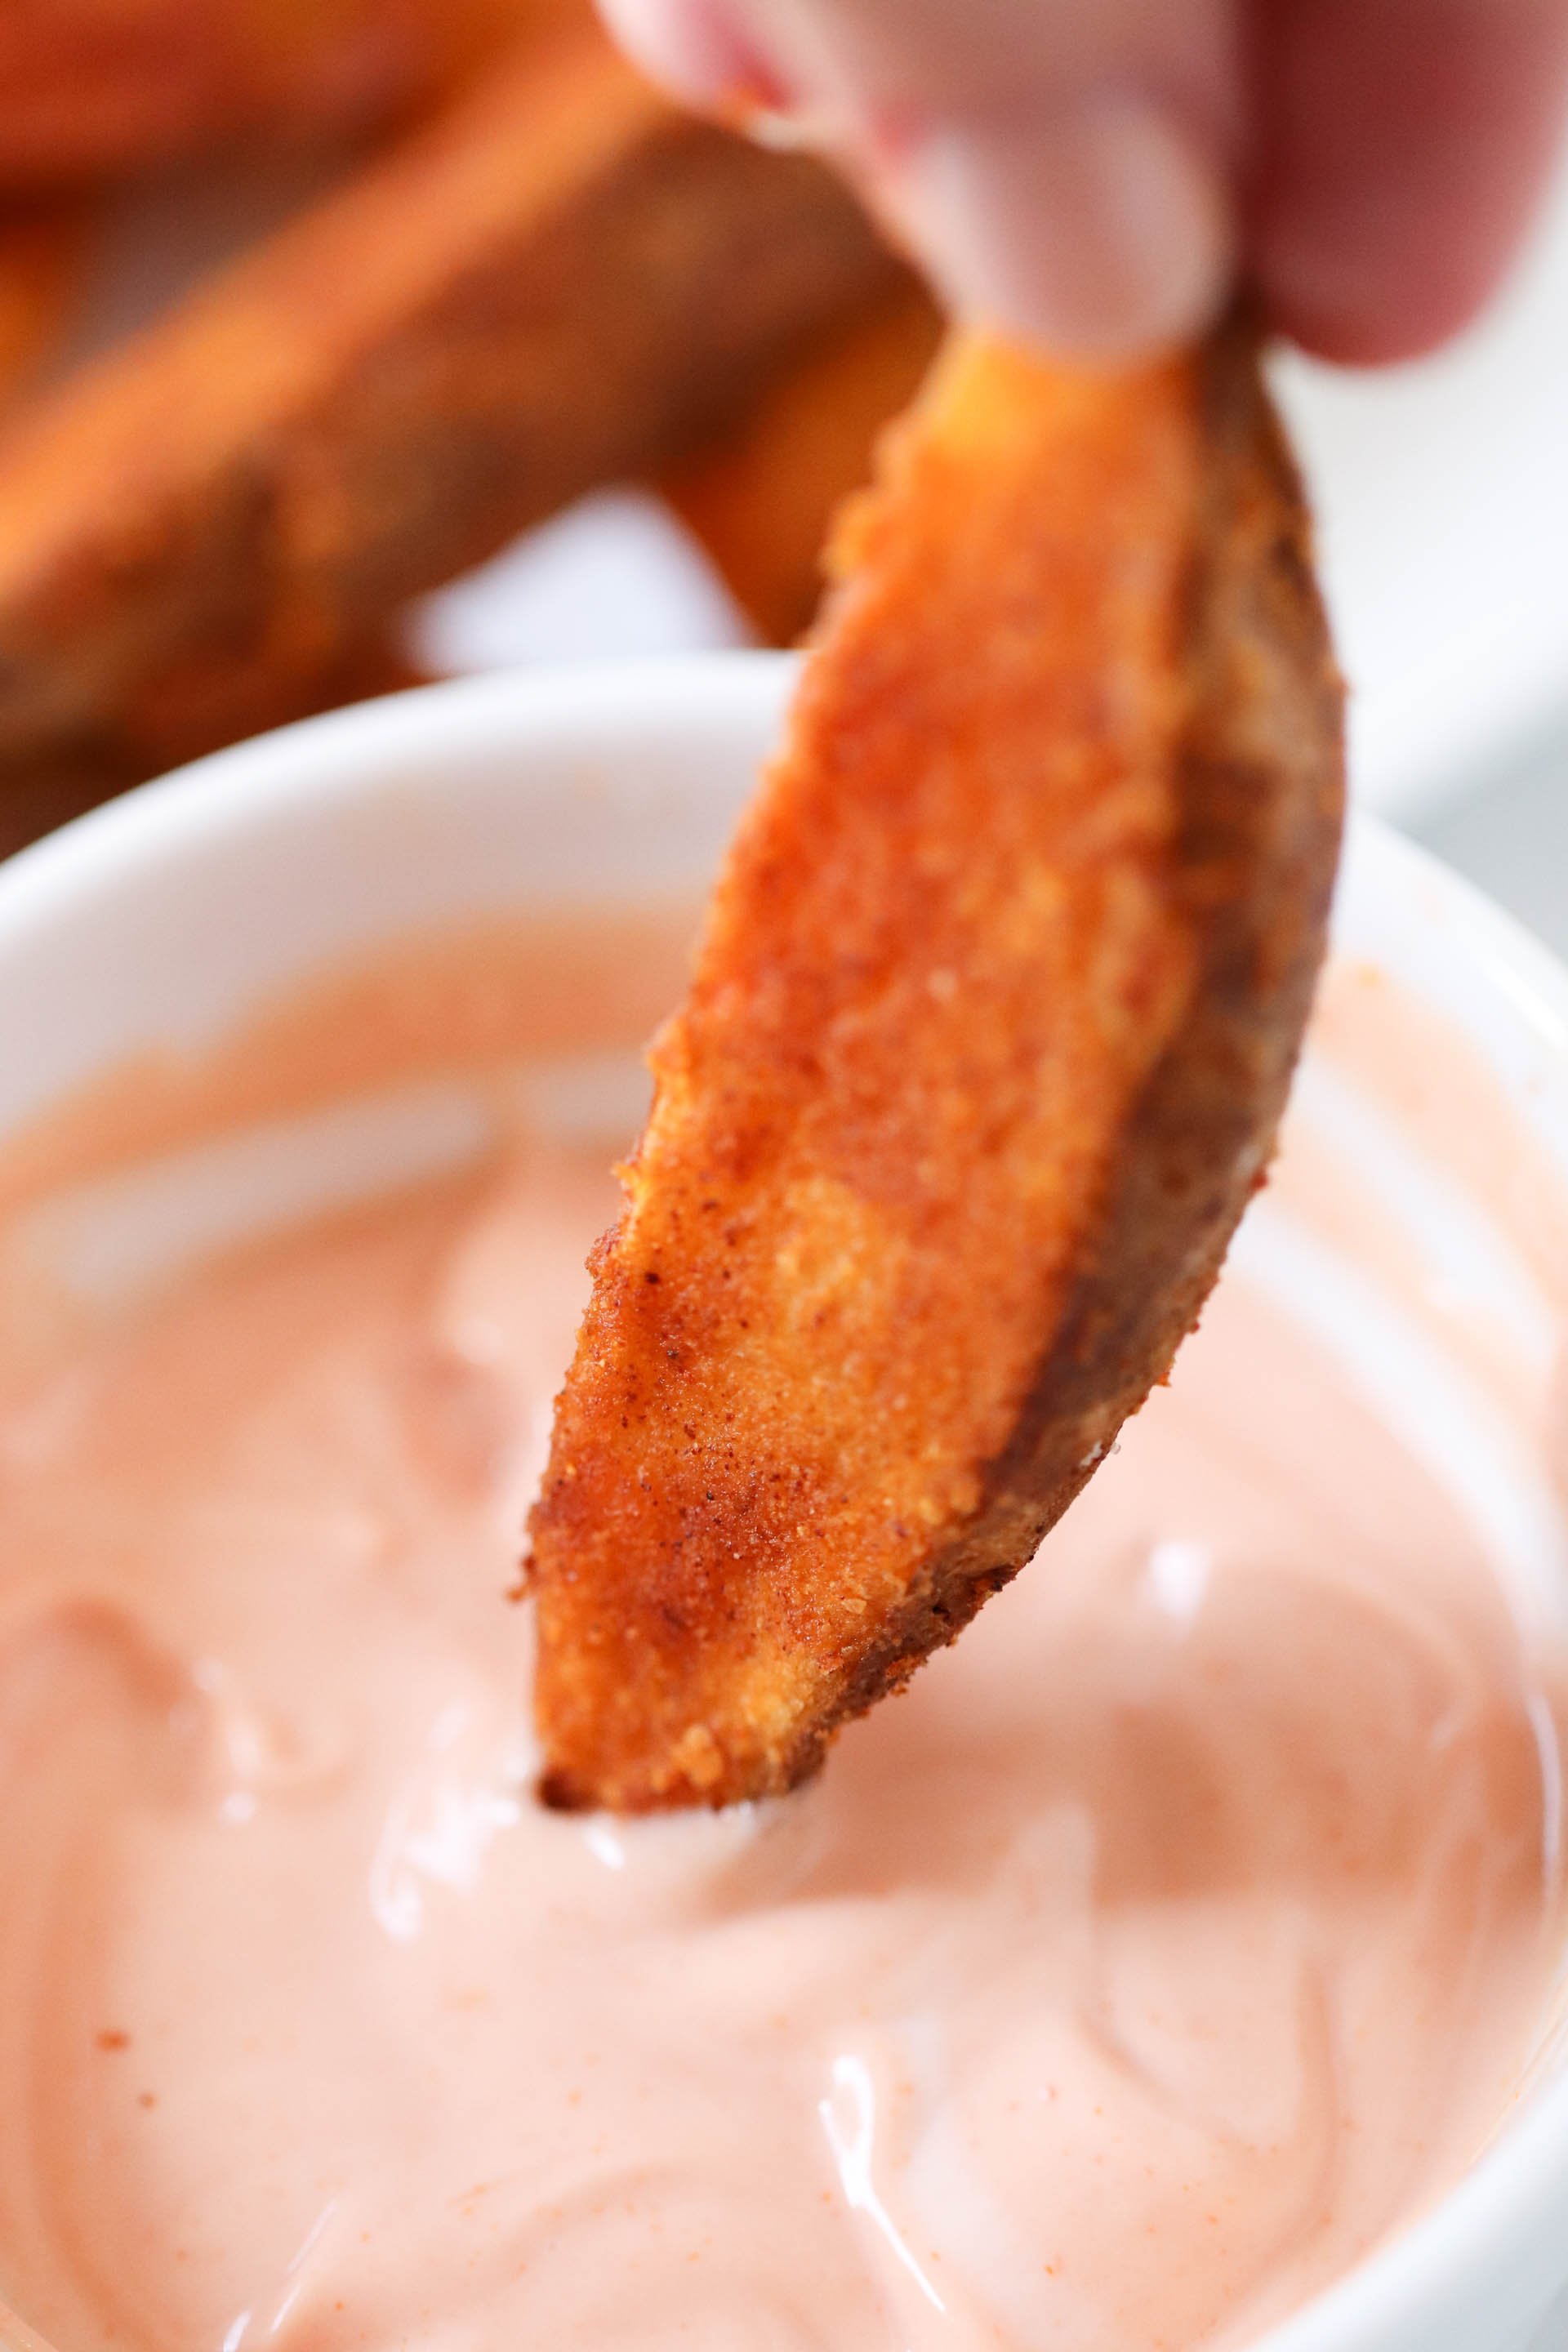 Baked Tater Wedge dipped in Fry Sauce